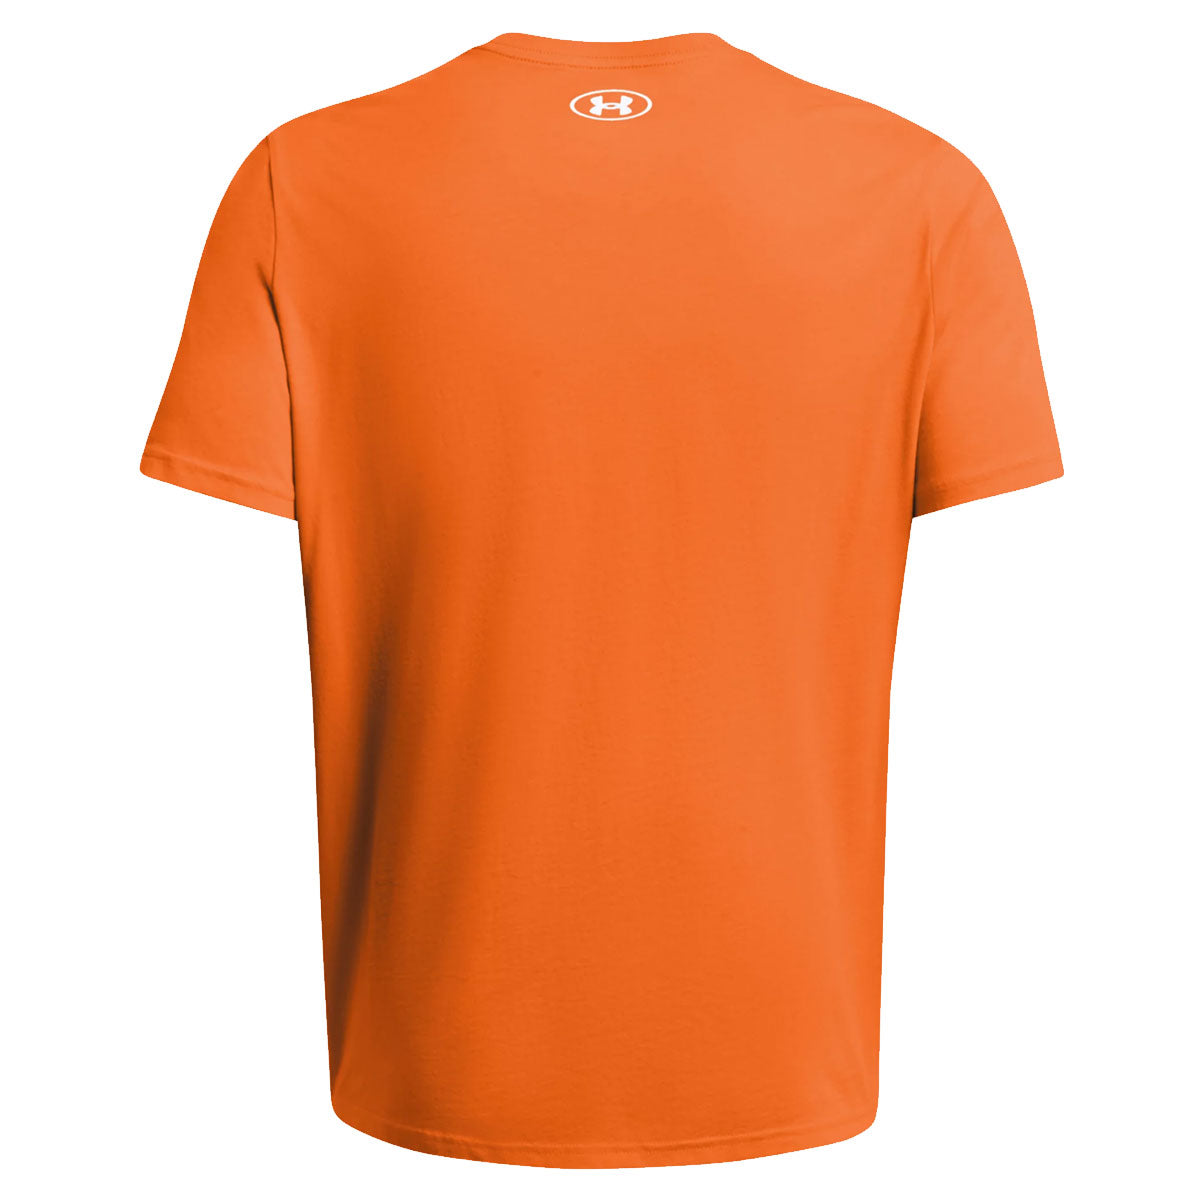 Under Armour Sportstyle Left Chest Short Sleeve Tee - Mens - Atomic/White